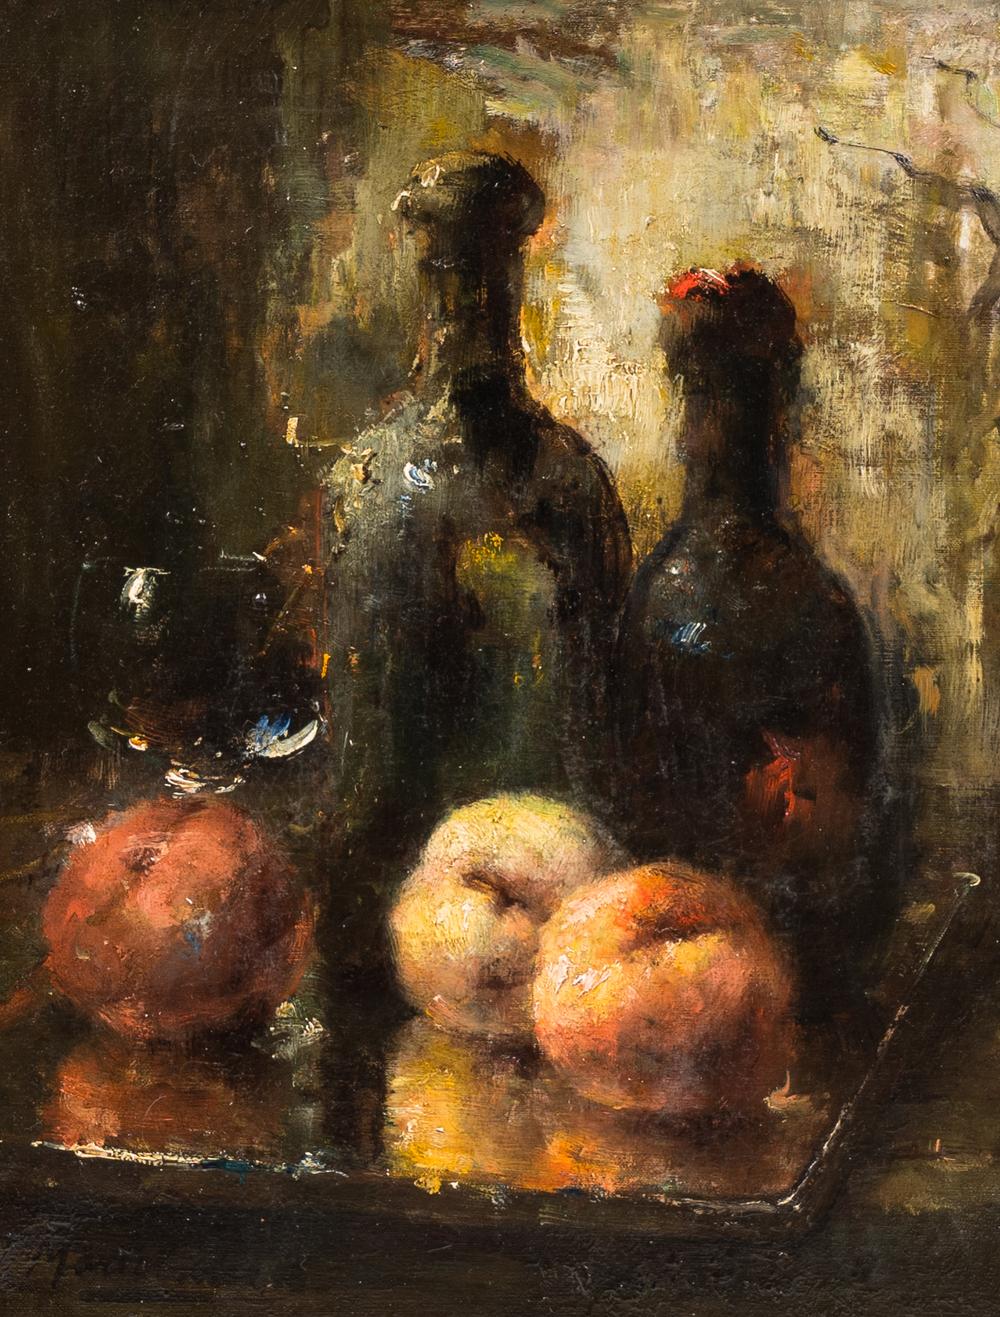 Still life oil painting of peaches, a wine glass and bottles by Frans Mortelmans 1